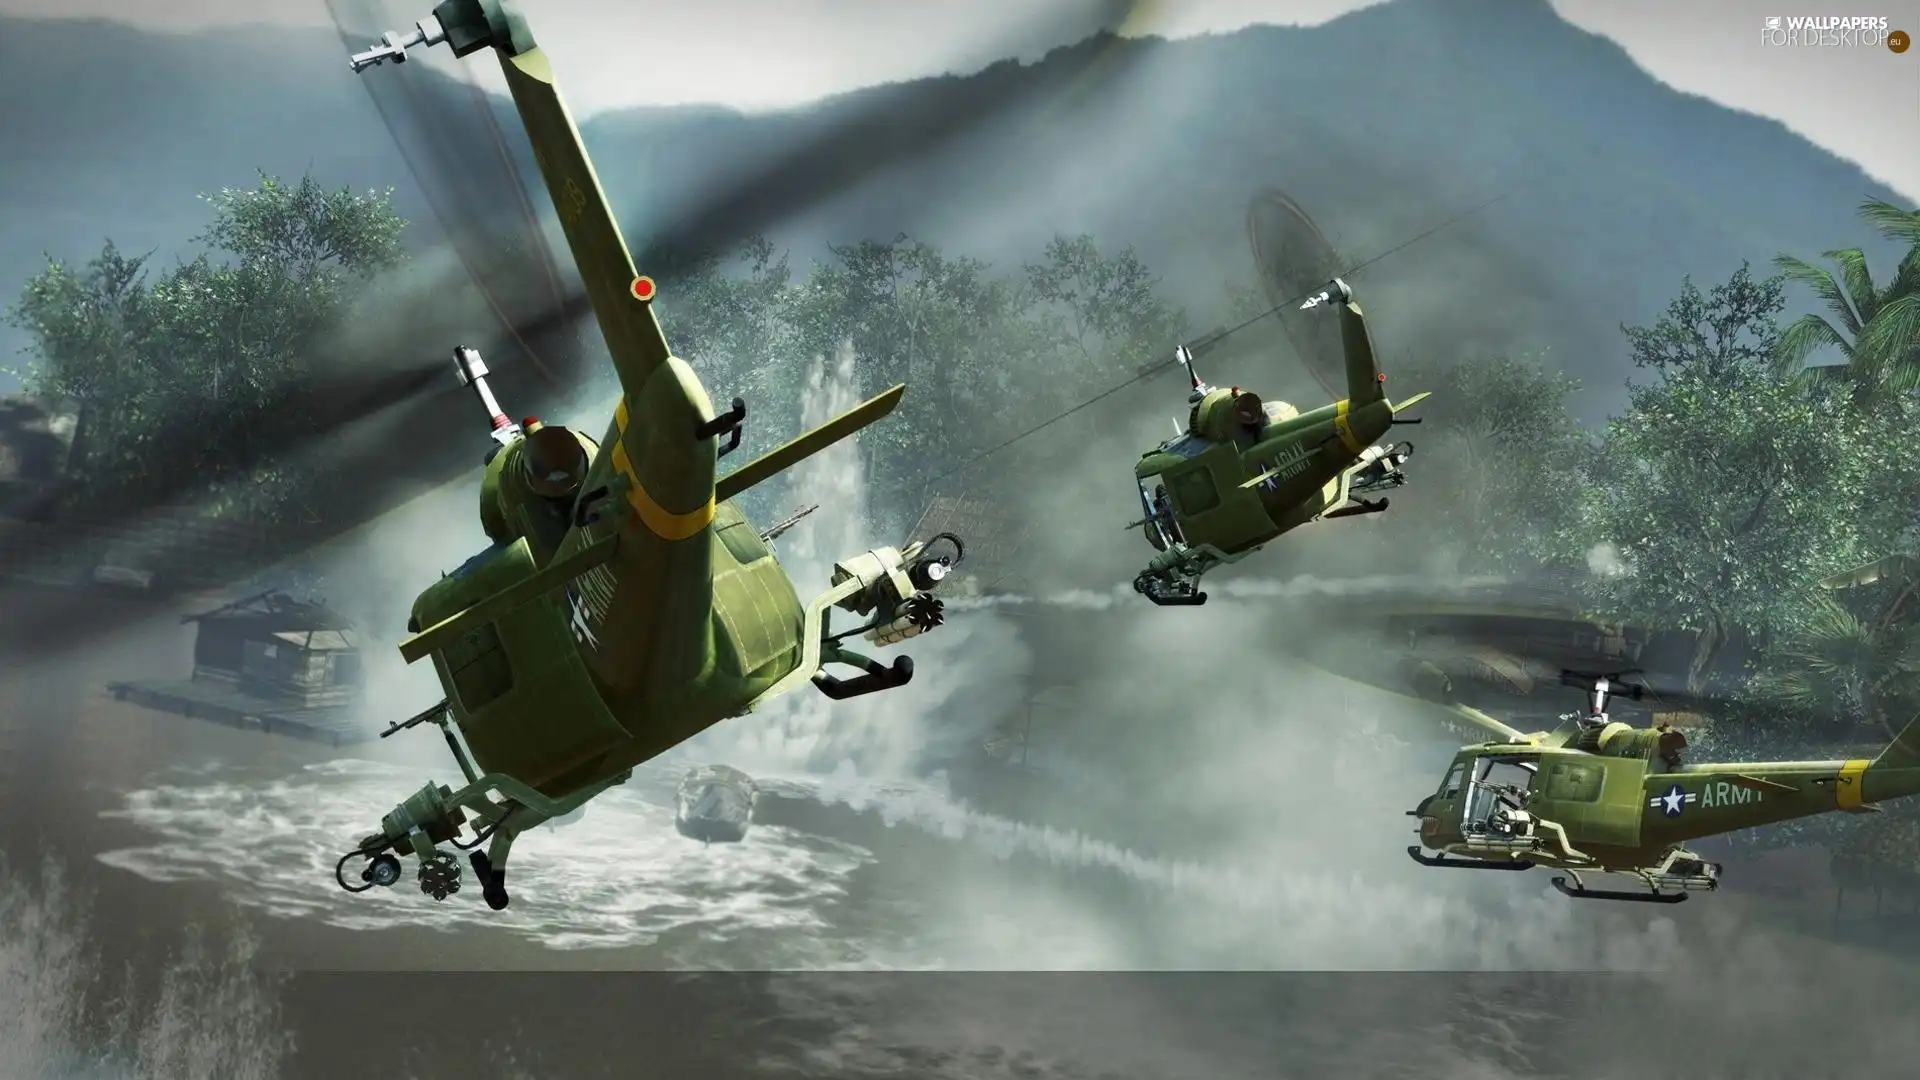 Battle, helicopters, action